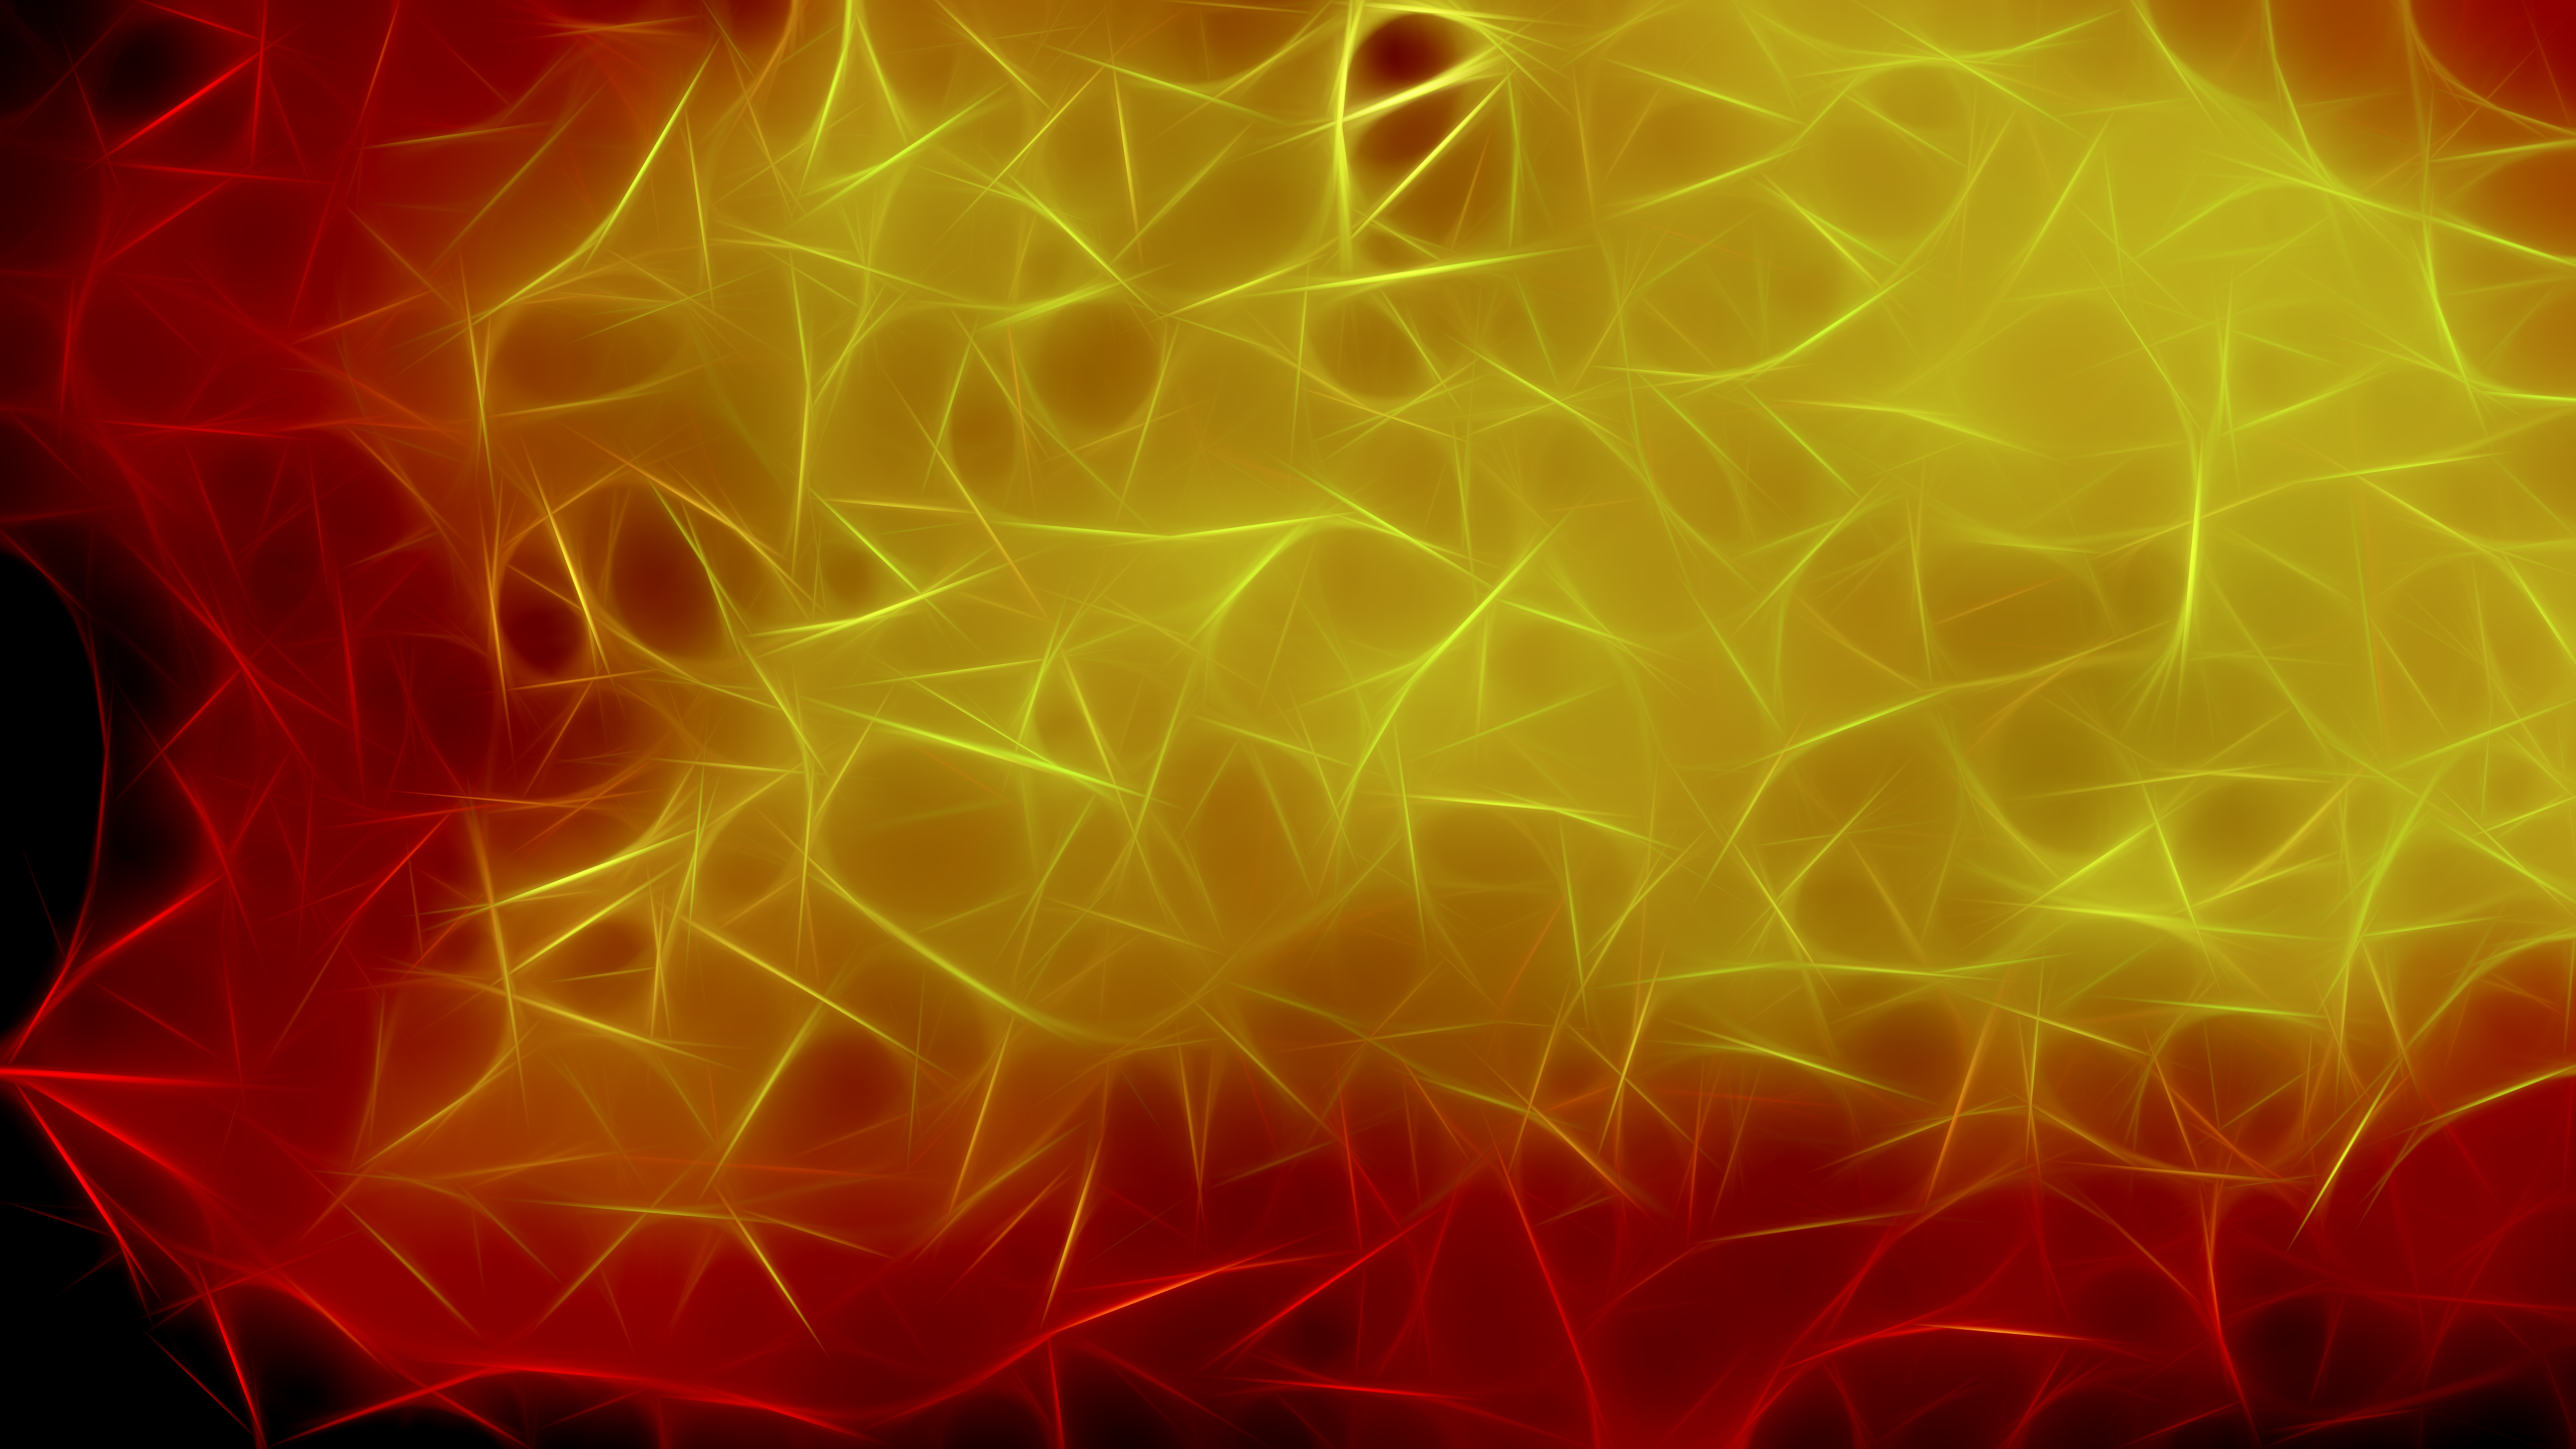 Abstract Black Red And Gold Fractal Wallpaper Image - Light , HD Wallpaper & Backgrounds